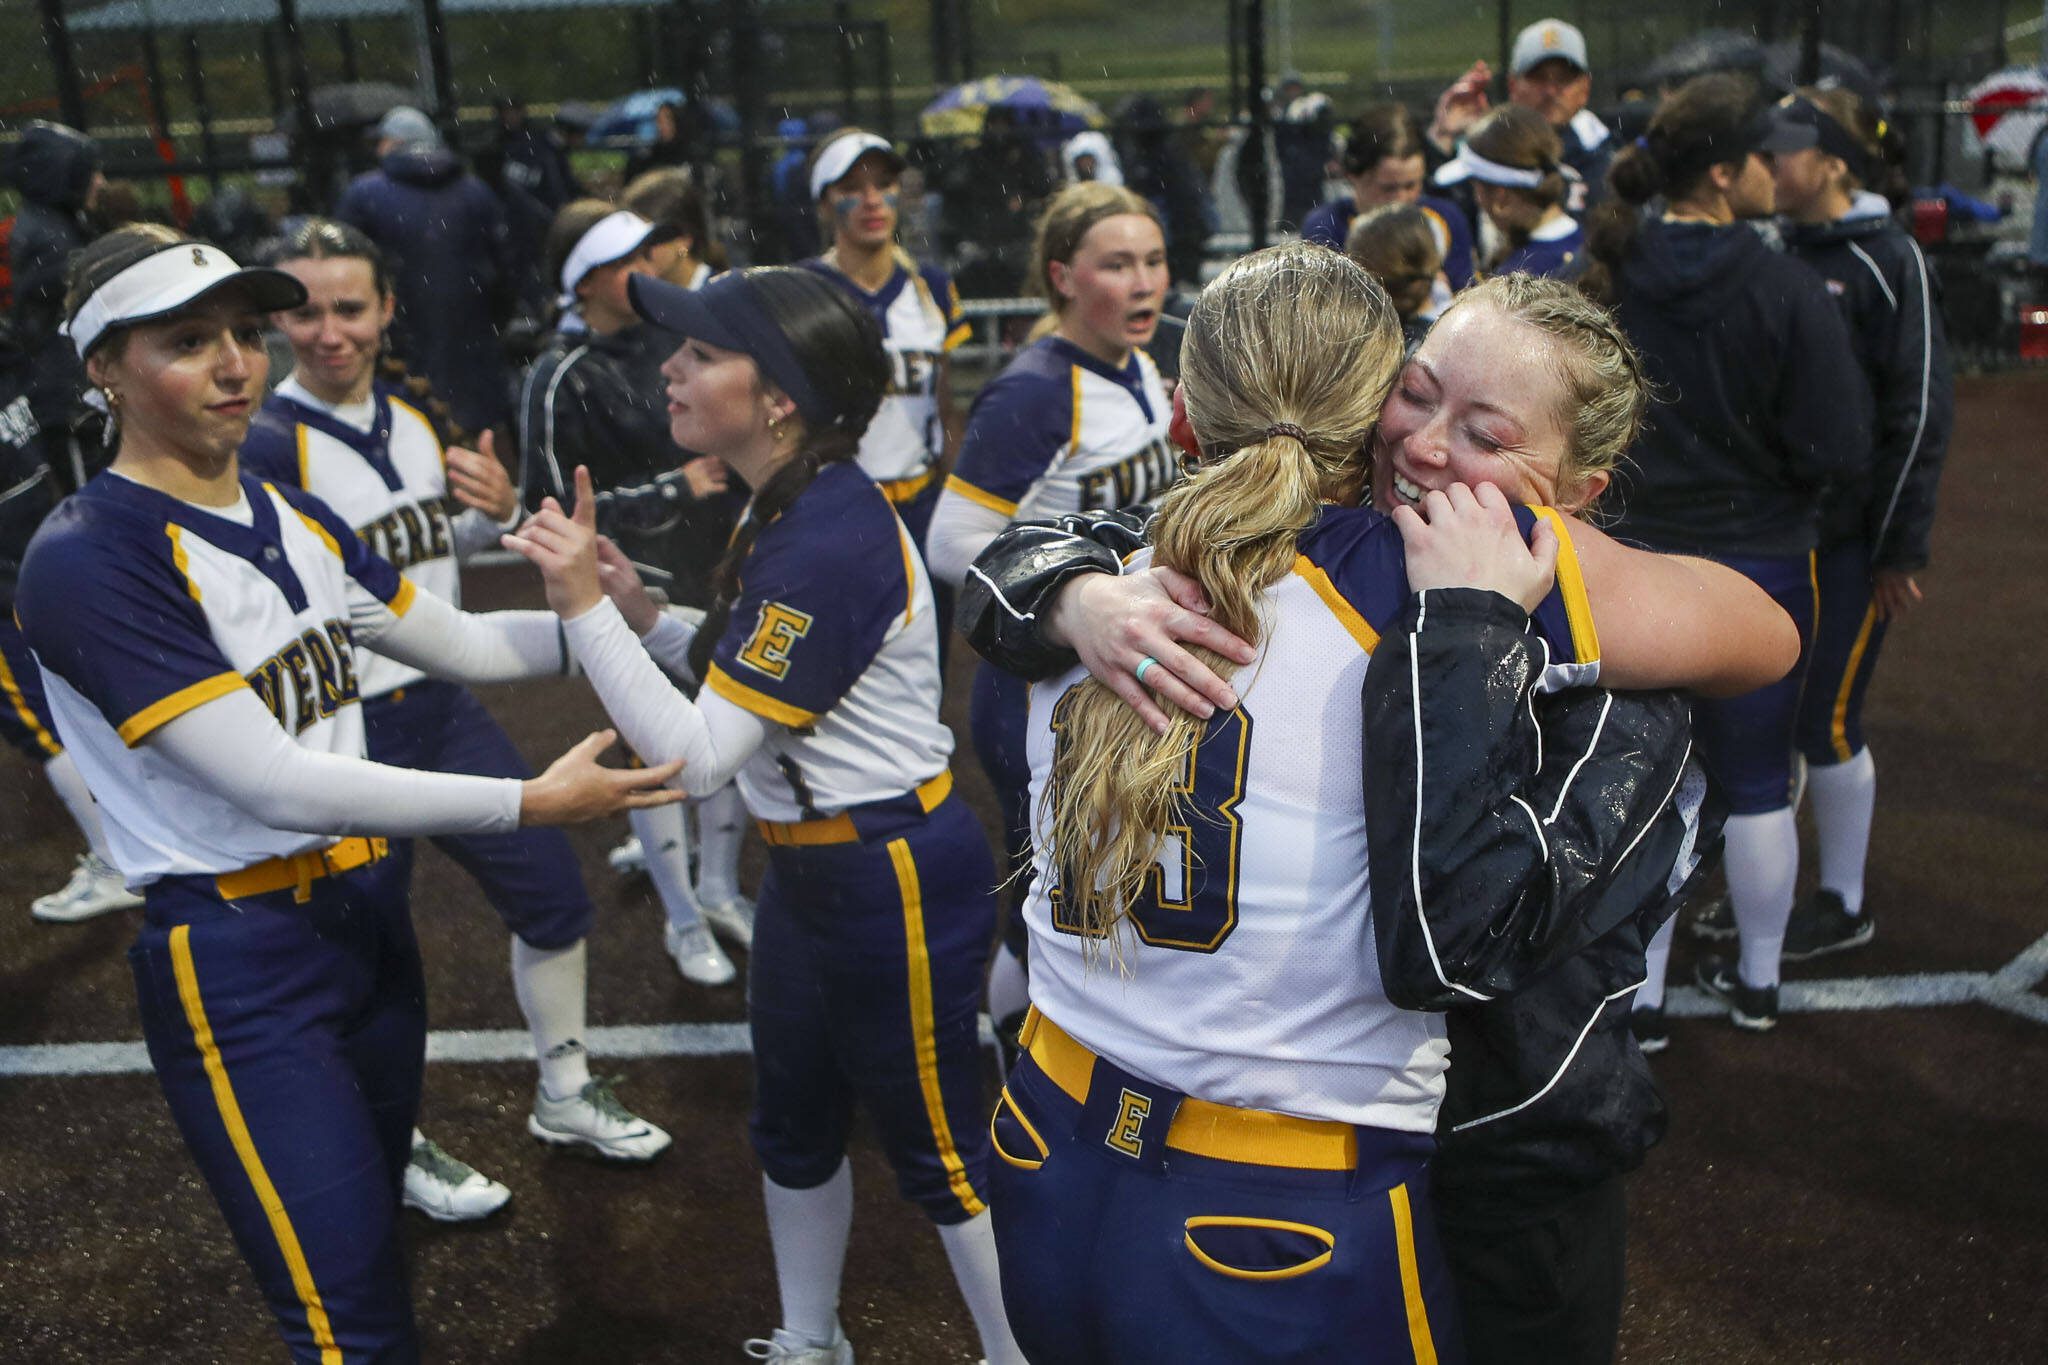 Everett players celebrate during a Class 3A District 1 softball championship game between Snohomish and Everett at Phil Johnson Fields in Everett, Washington on Thursday, May 16, 2024. Everett won, 10-0. (Annie Barker / The Herald)